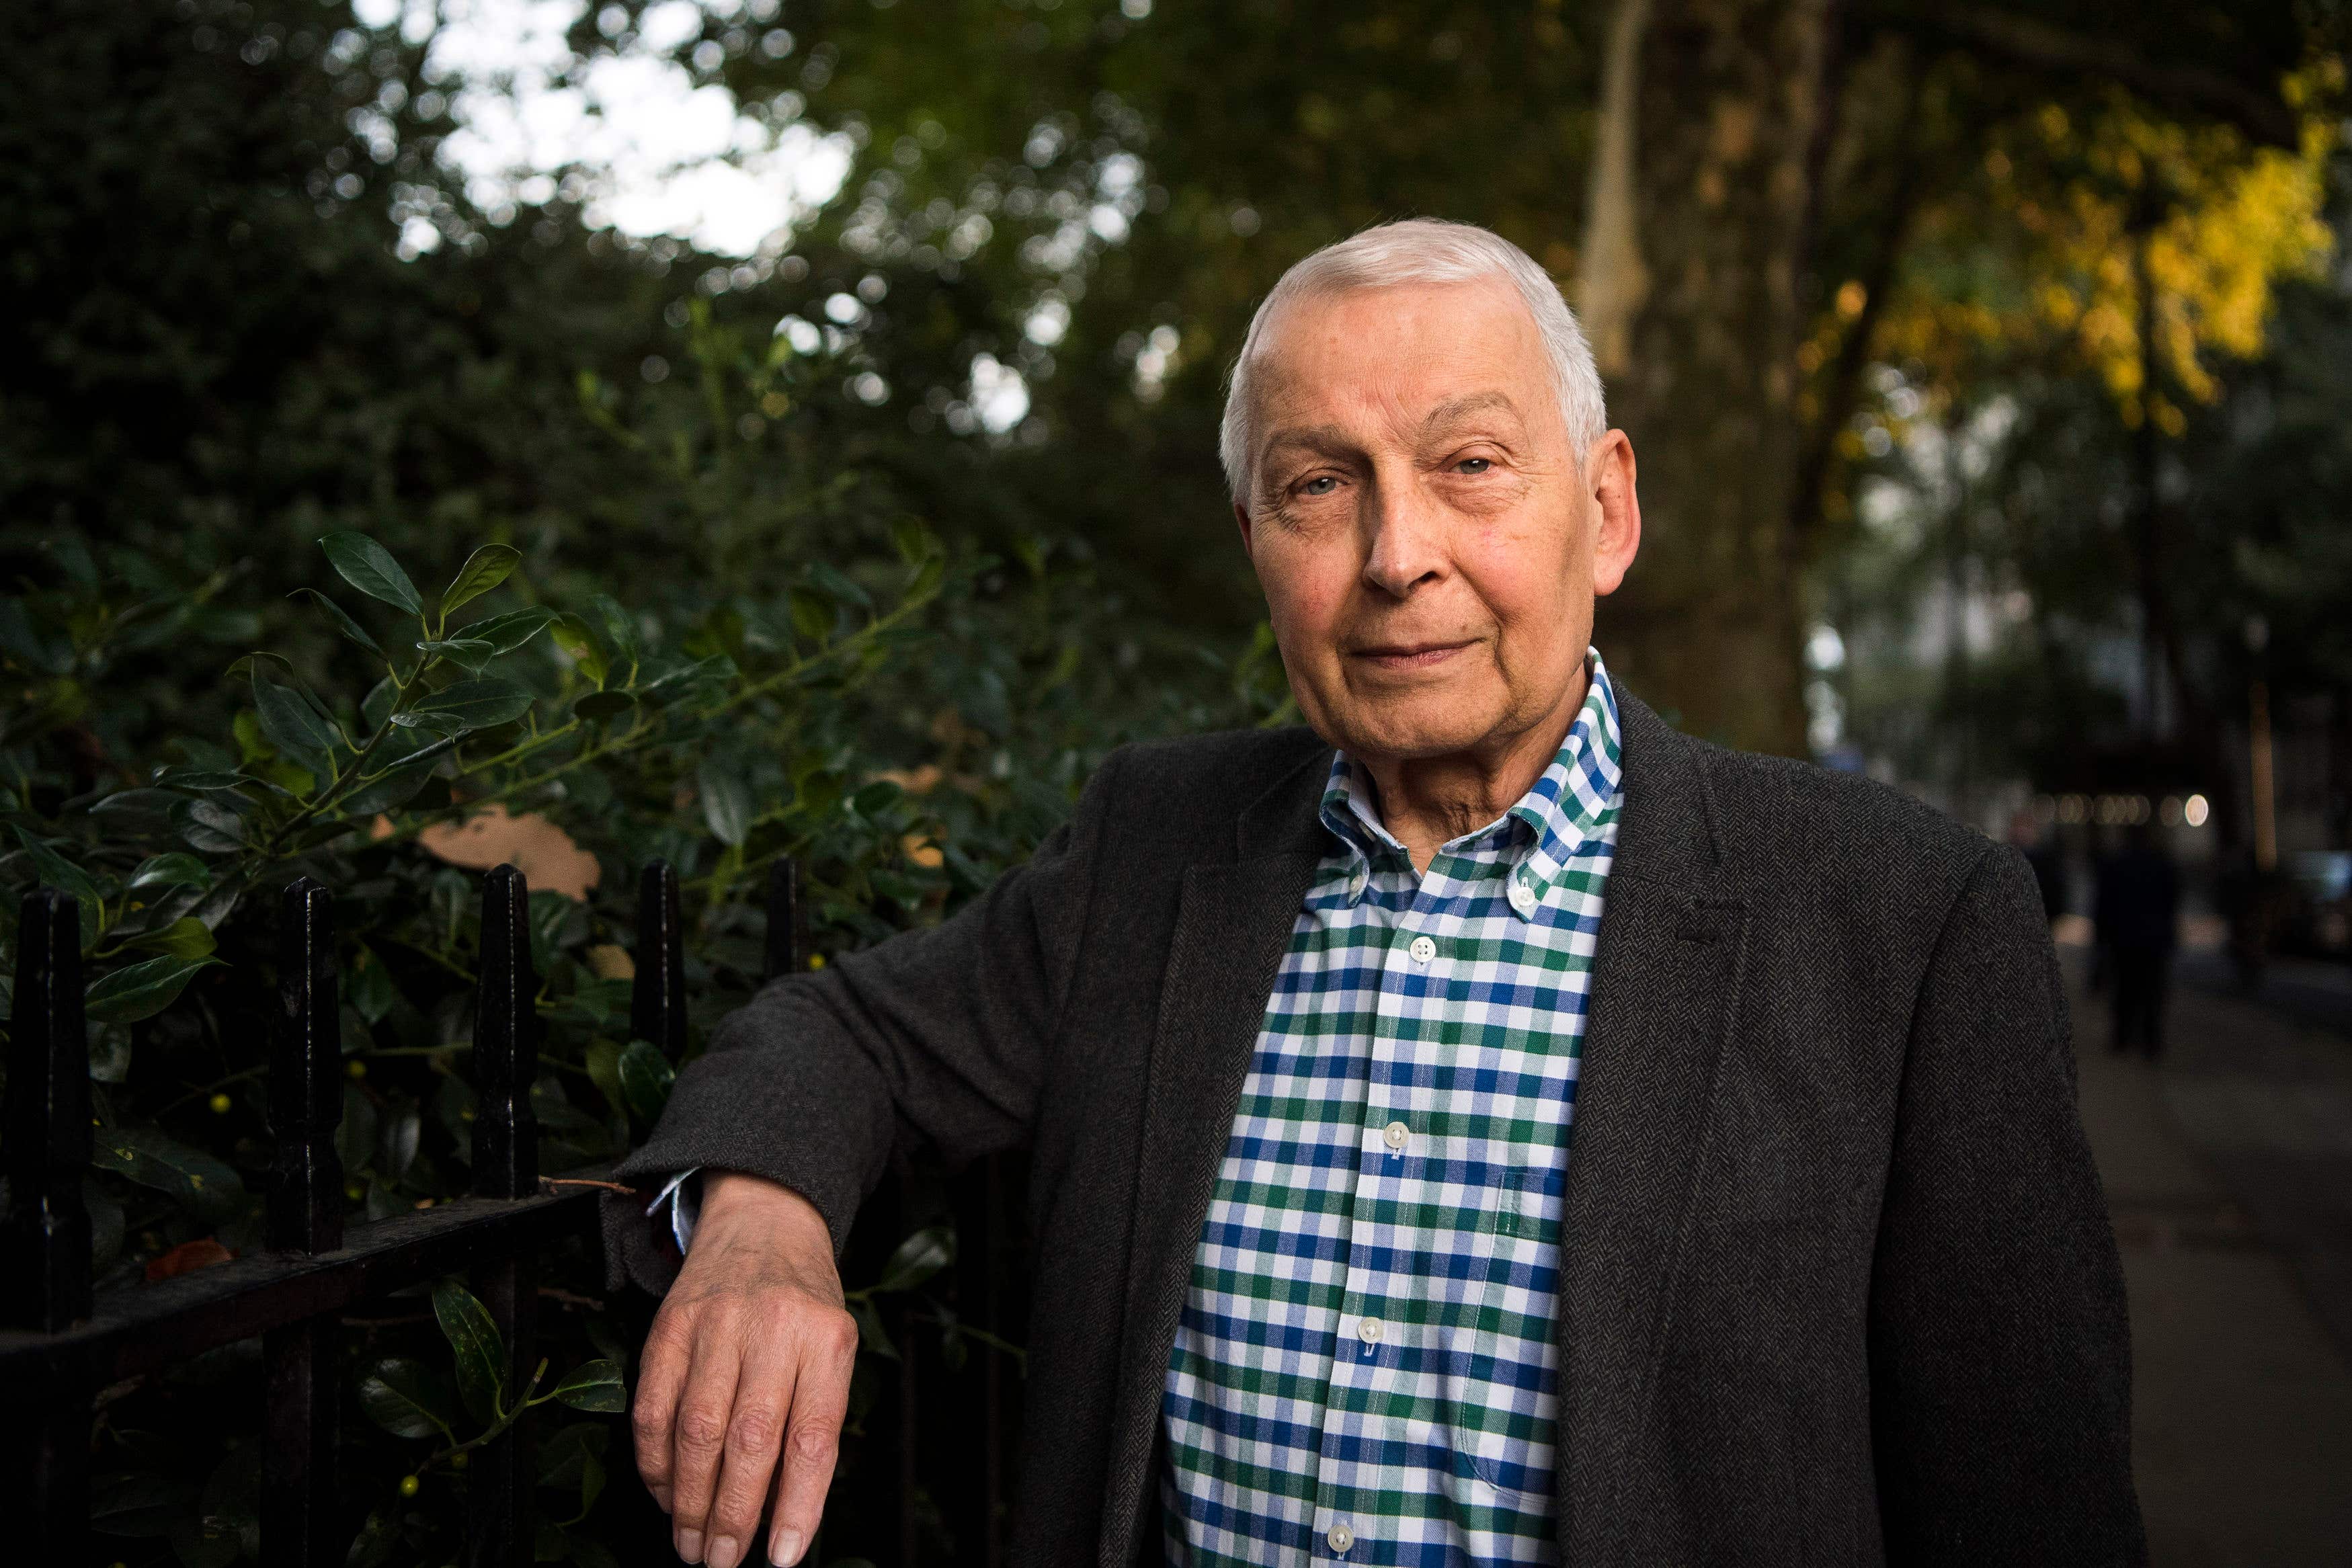 Frank Field, man of mischief and principle